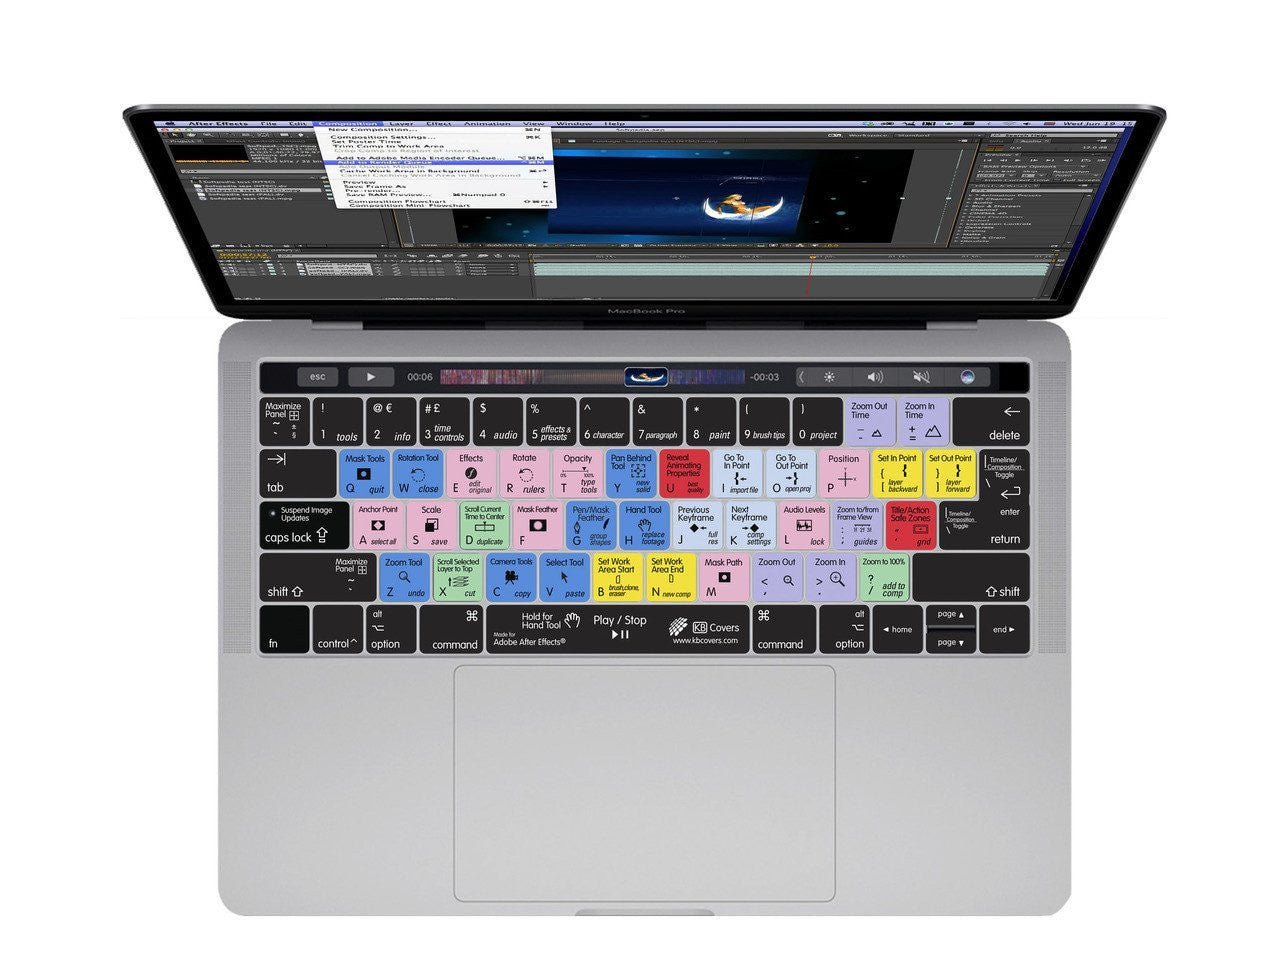 Adobe After Effects Keyboard Covers for MacBook and iMac - Editors Keys